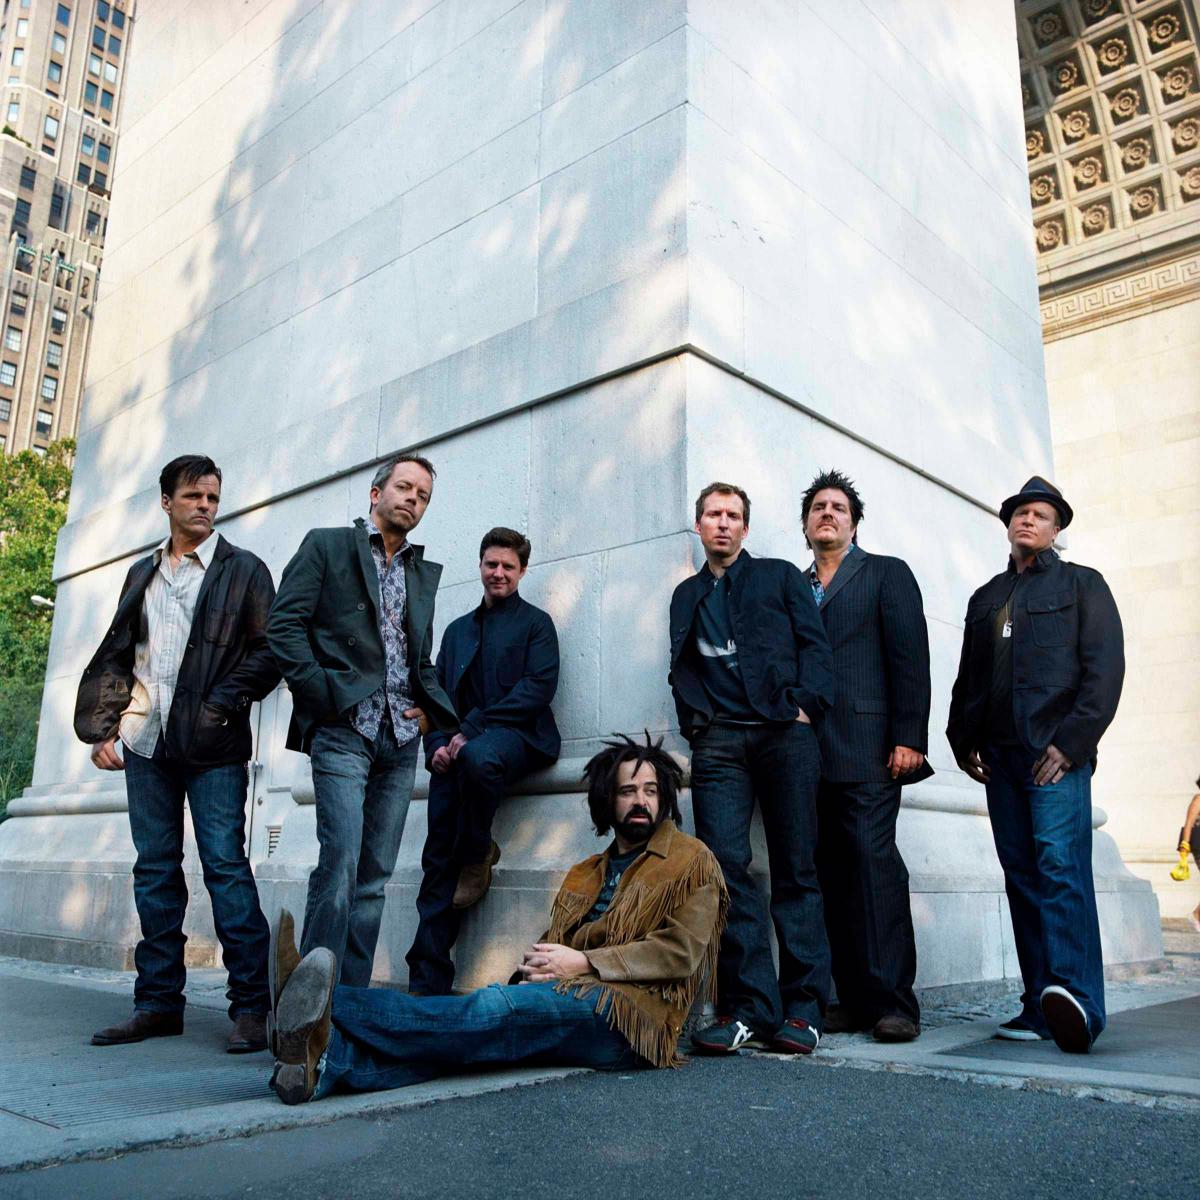 Counting Crows - Isle of Wight Festival 2015 Line-up - Picture by Danny Clinch.